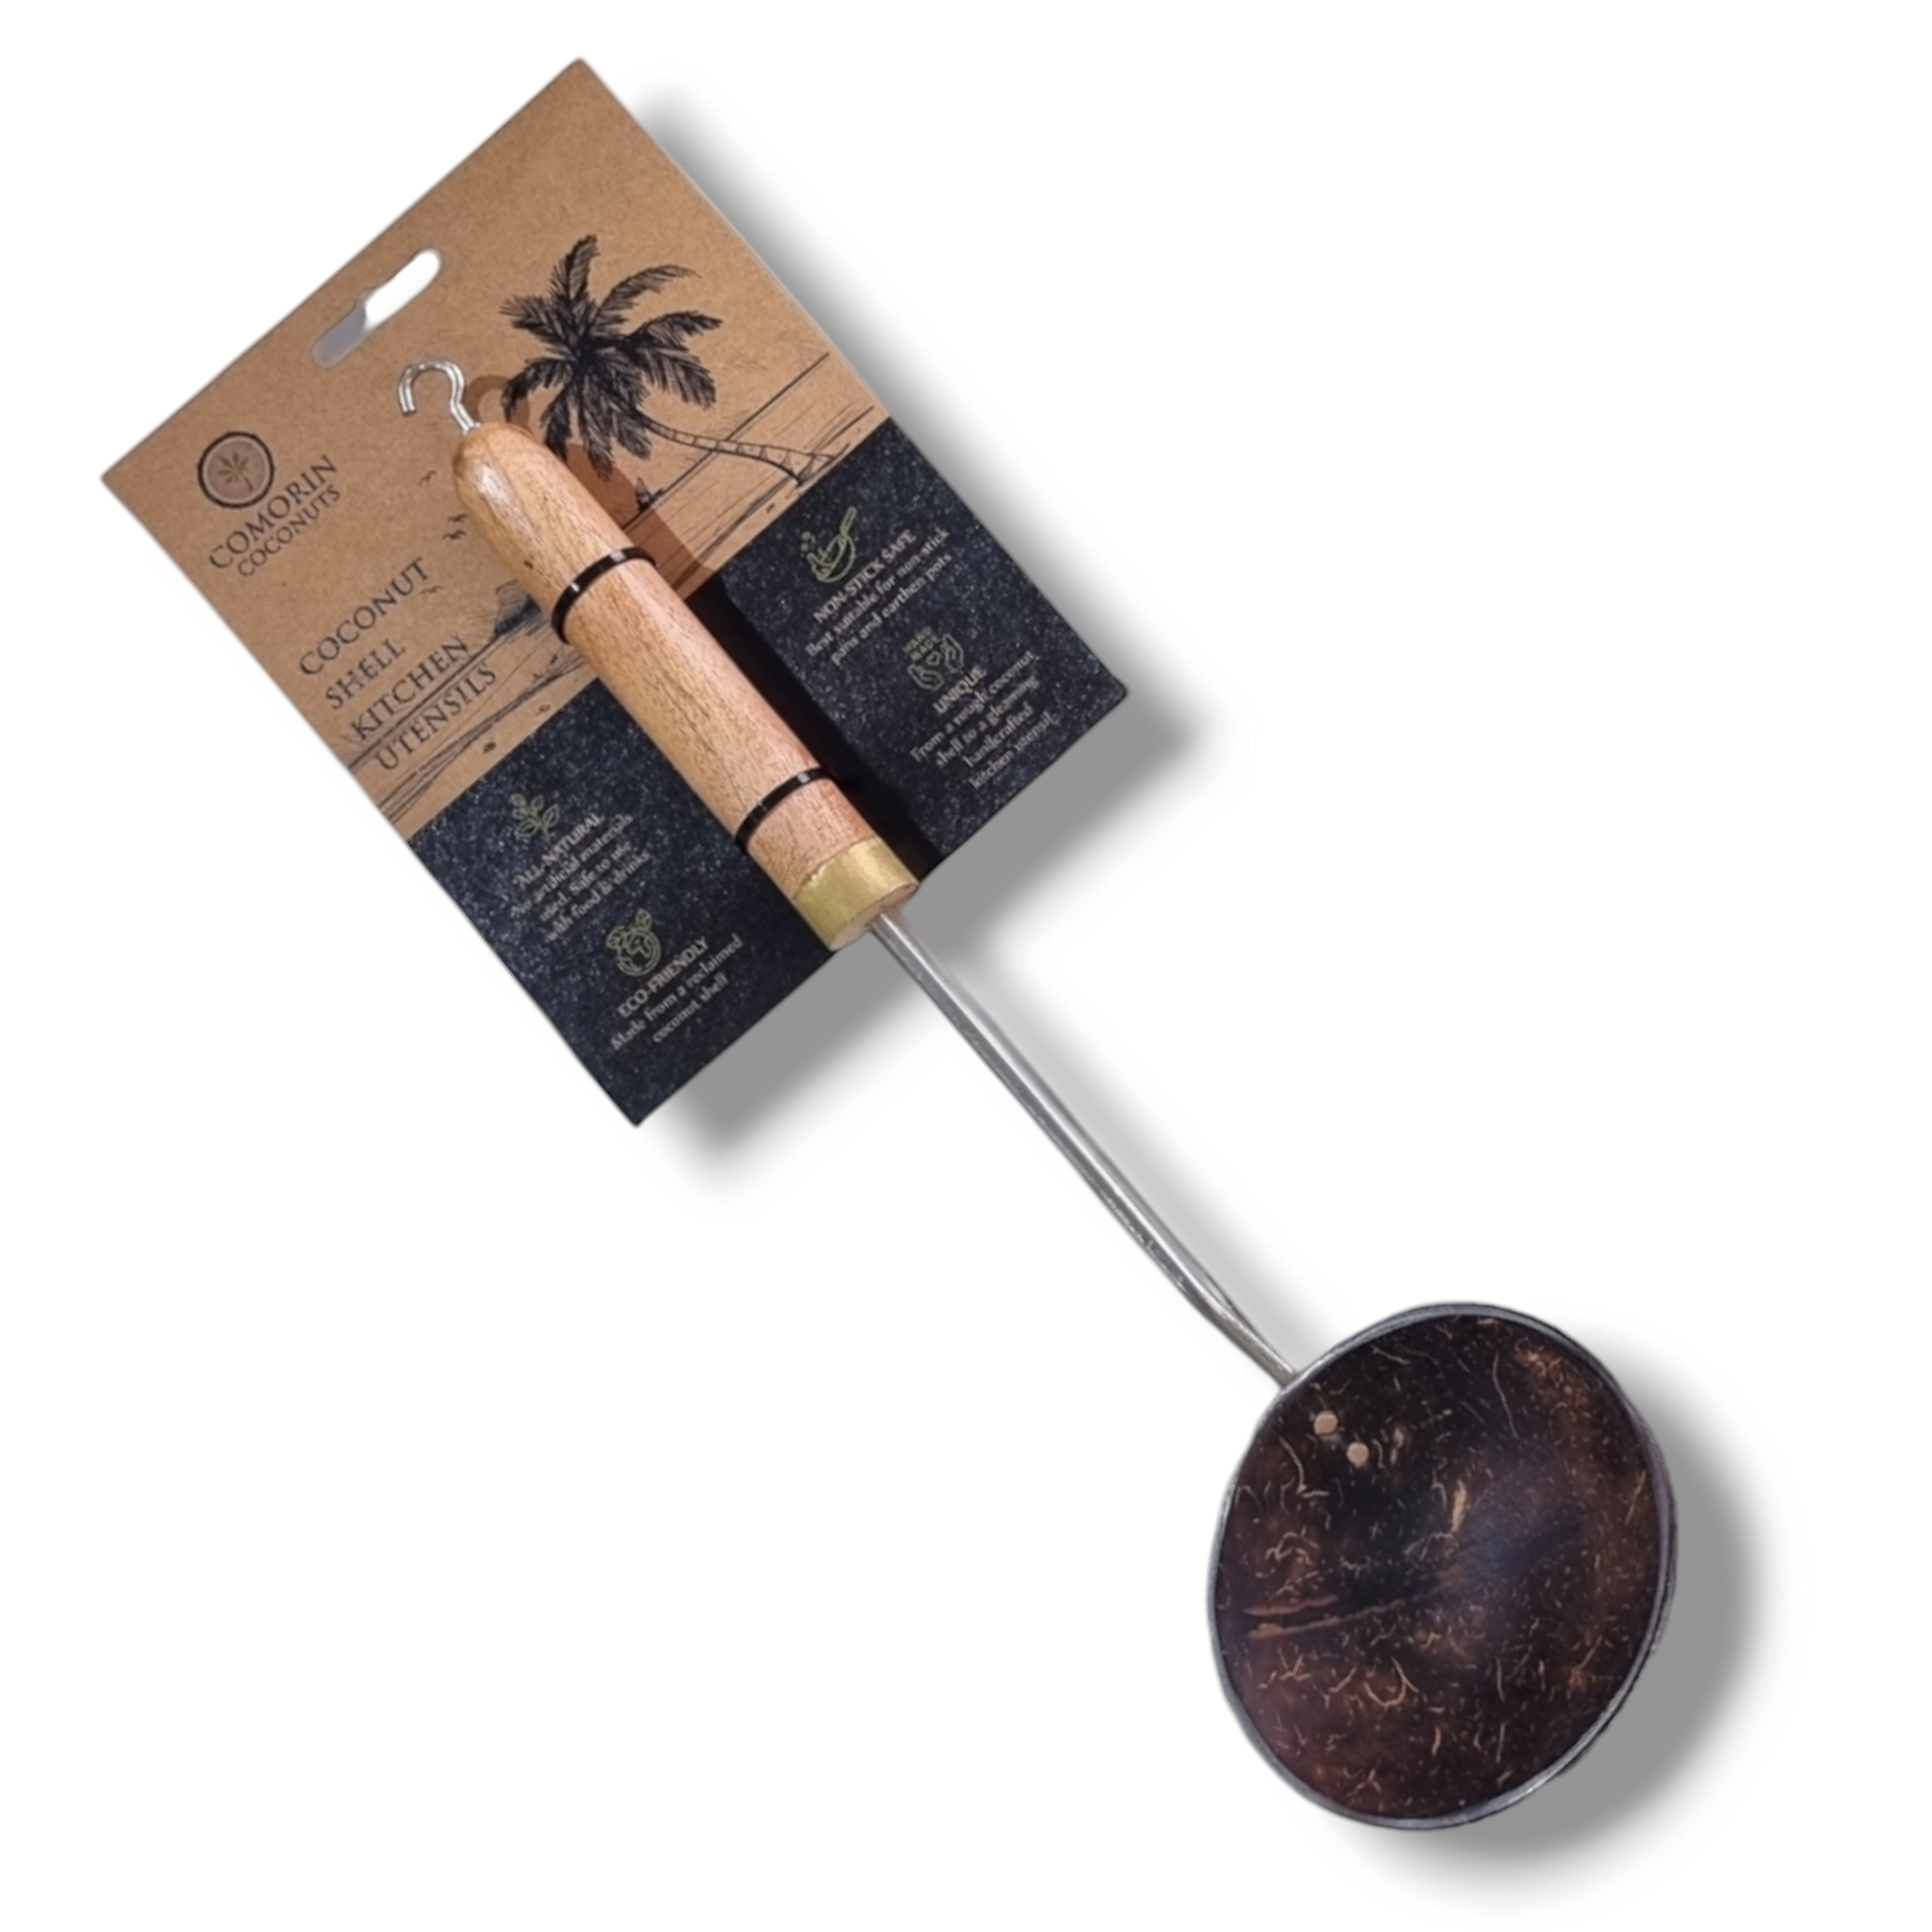 Comorin Coconuts Cooking Ladle - Medium (Stainless Steel handle | Copper joints)